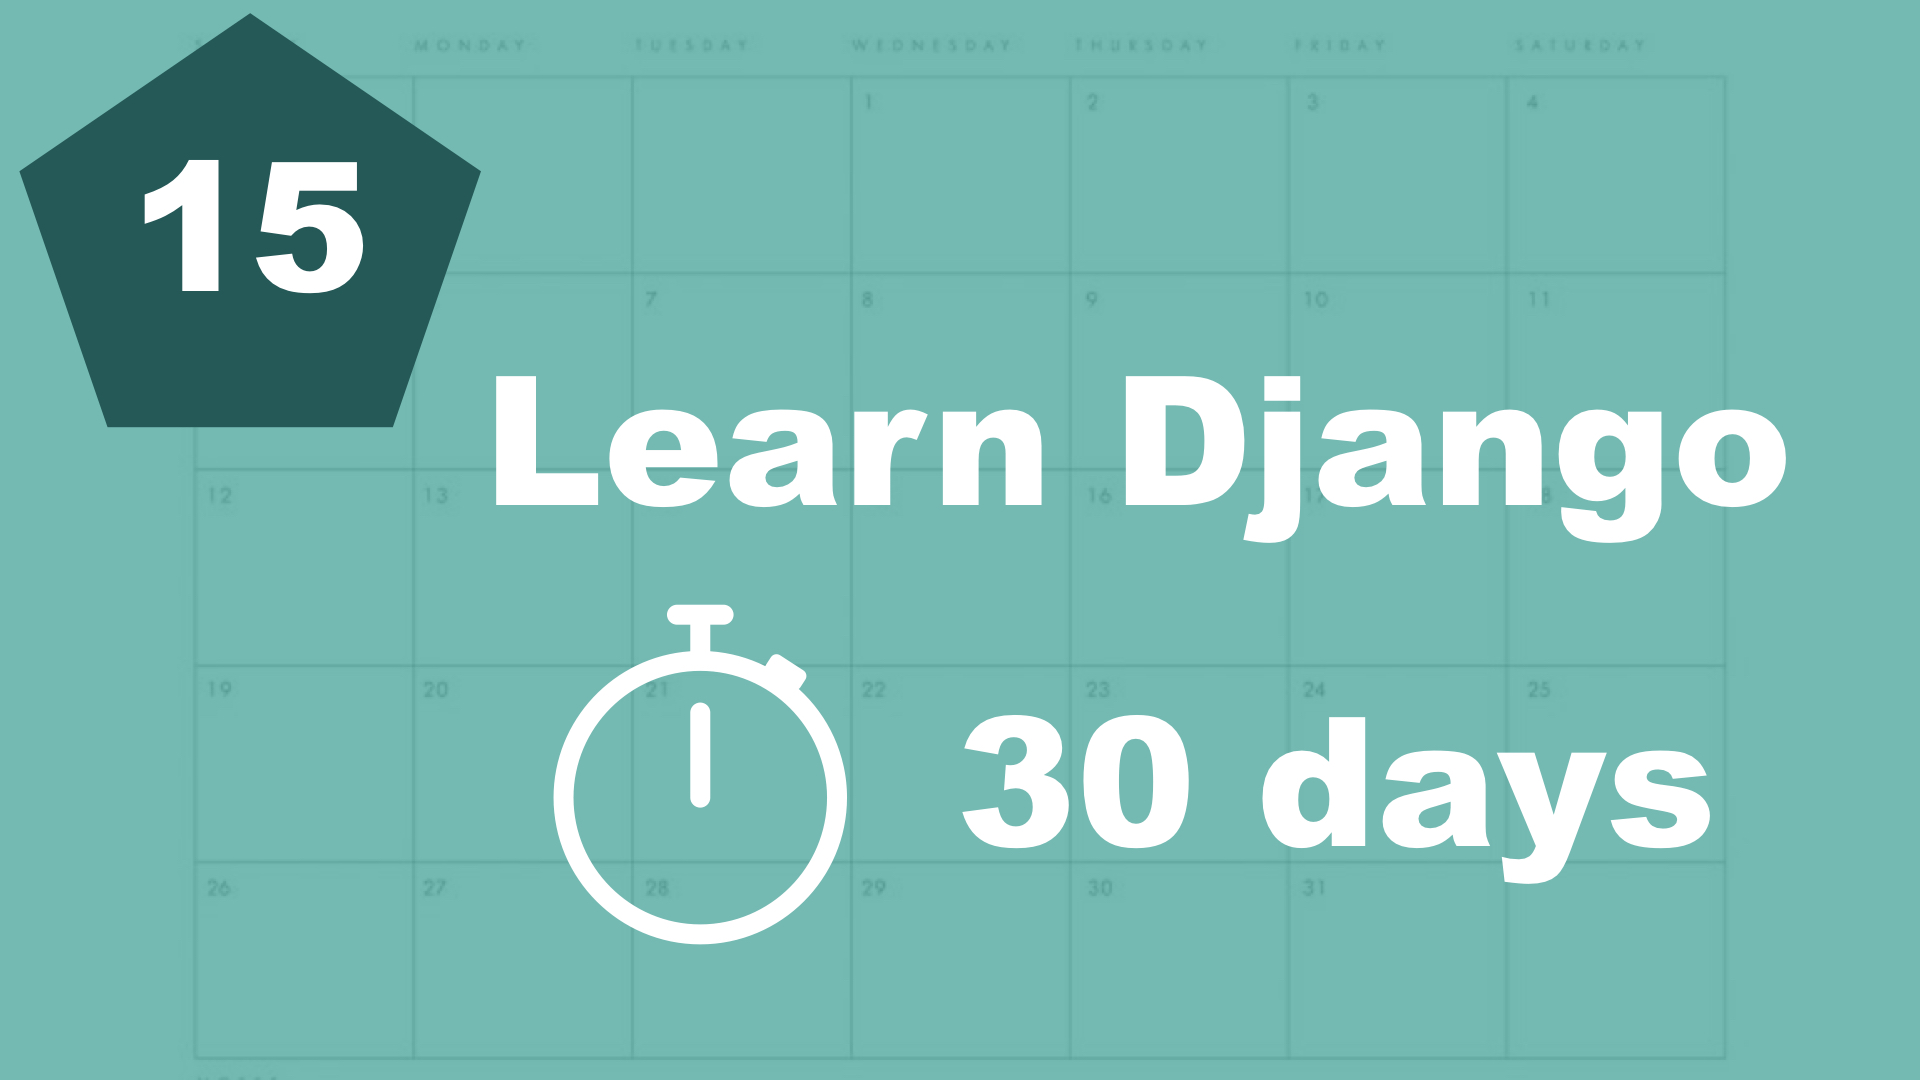 Category detail page - 30 days of Django